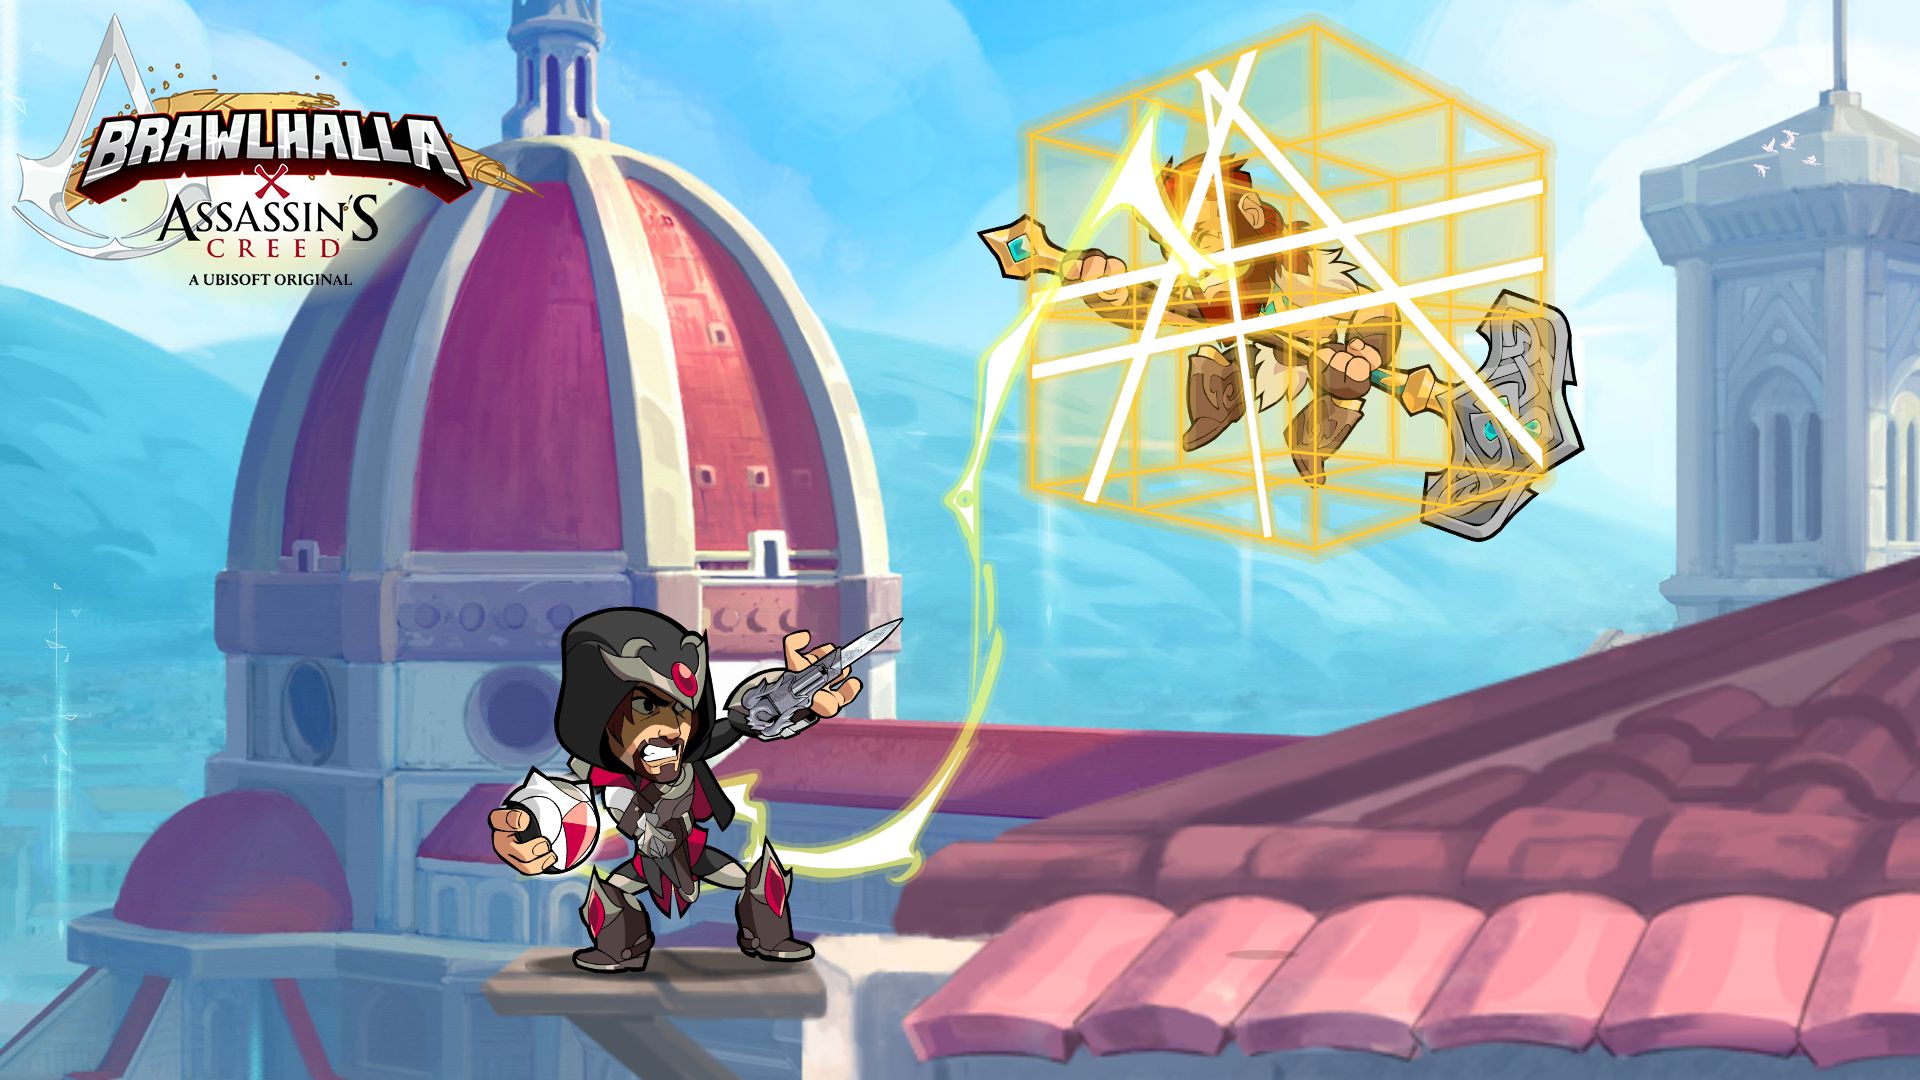 Brawlhalla’s Assassin’s Creed Epic Crossover